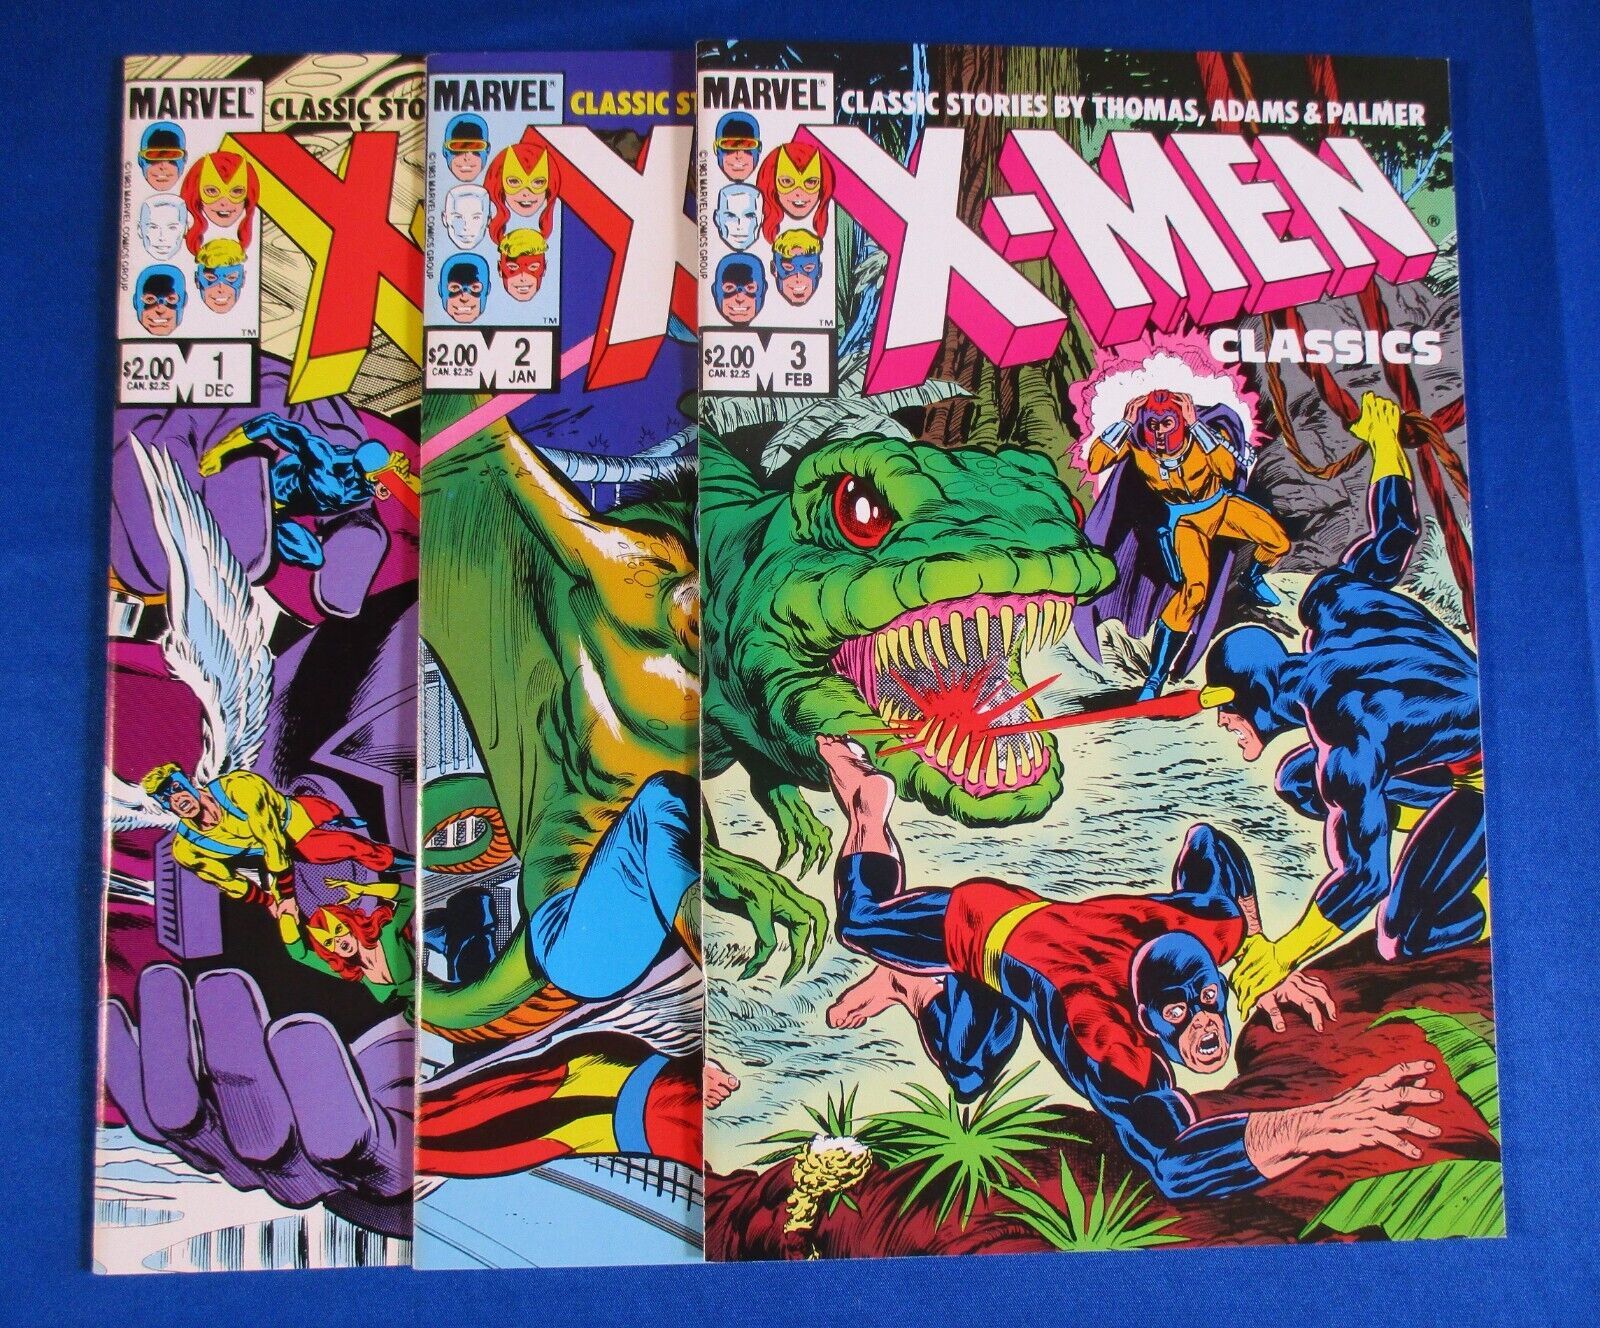 Primary image for X-Men Classic Stories 1 2 3 Marvel Comics 1983 Vintage Sentinel Cover Thomas